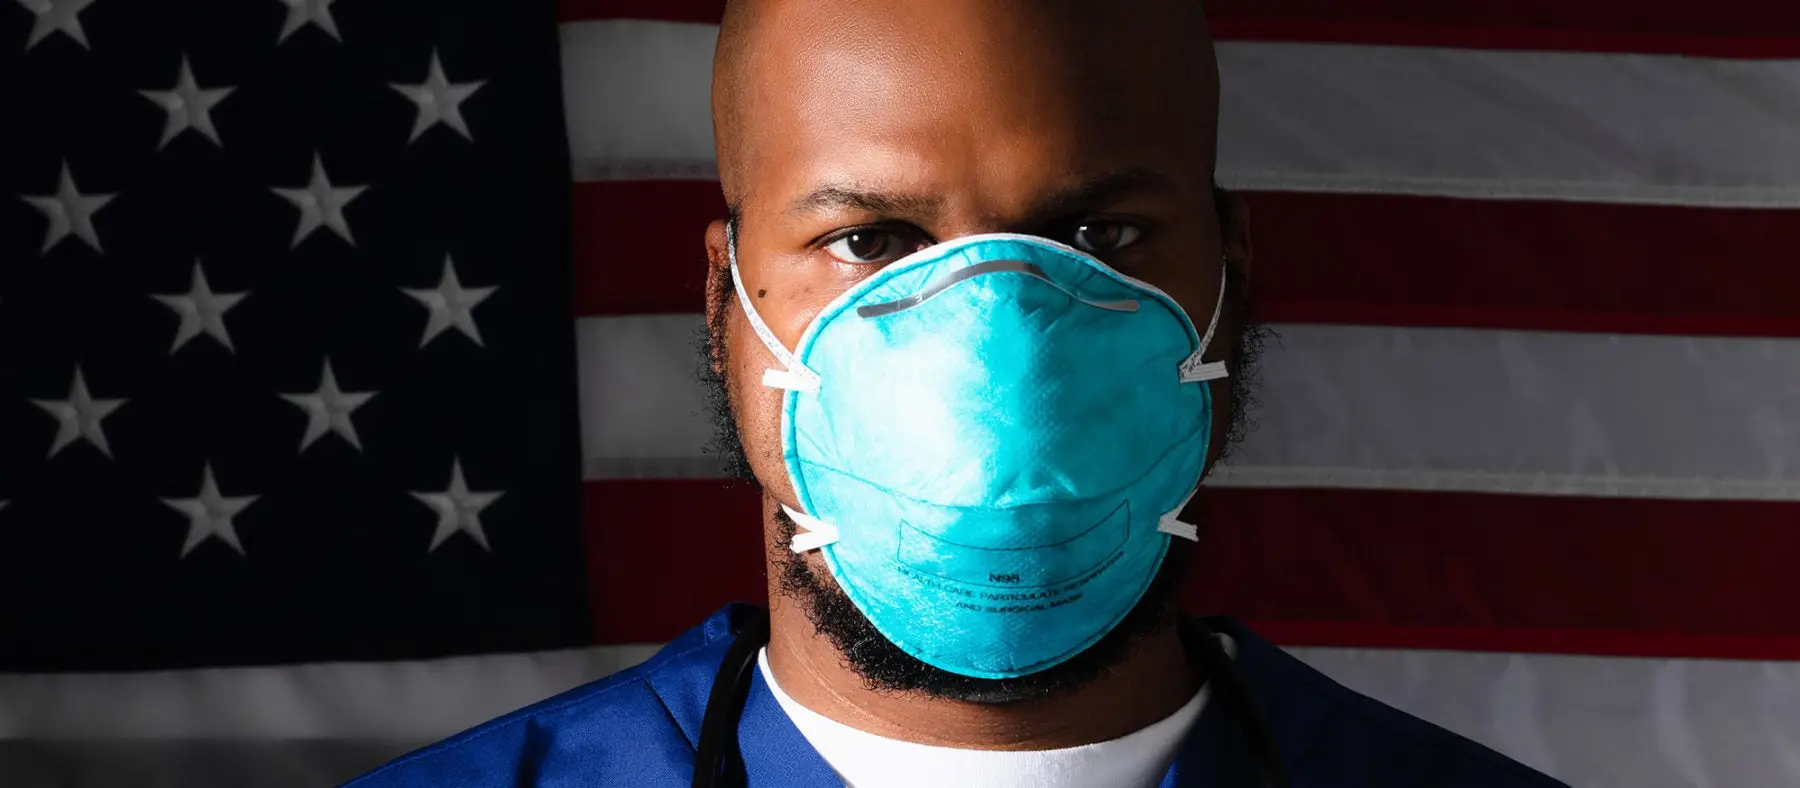 A healthcare worker wearing a medical protective mask stands in front of the american flag looking directly at the camera